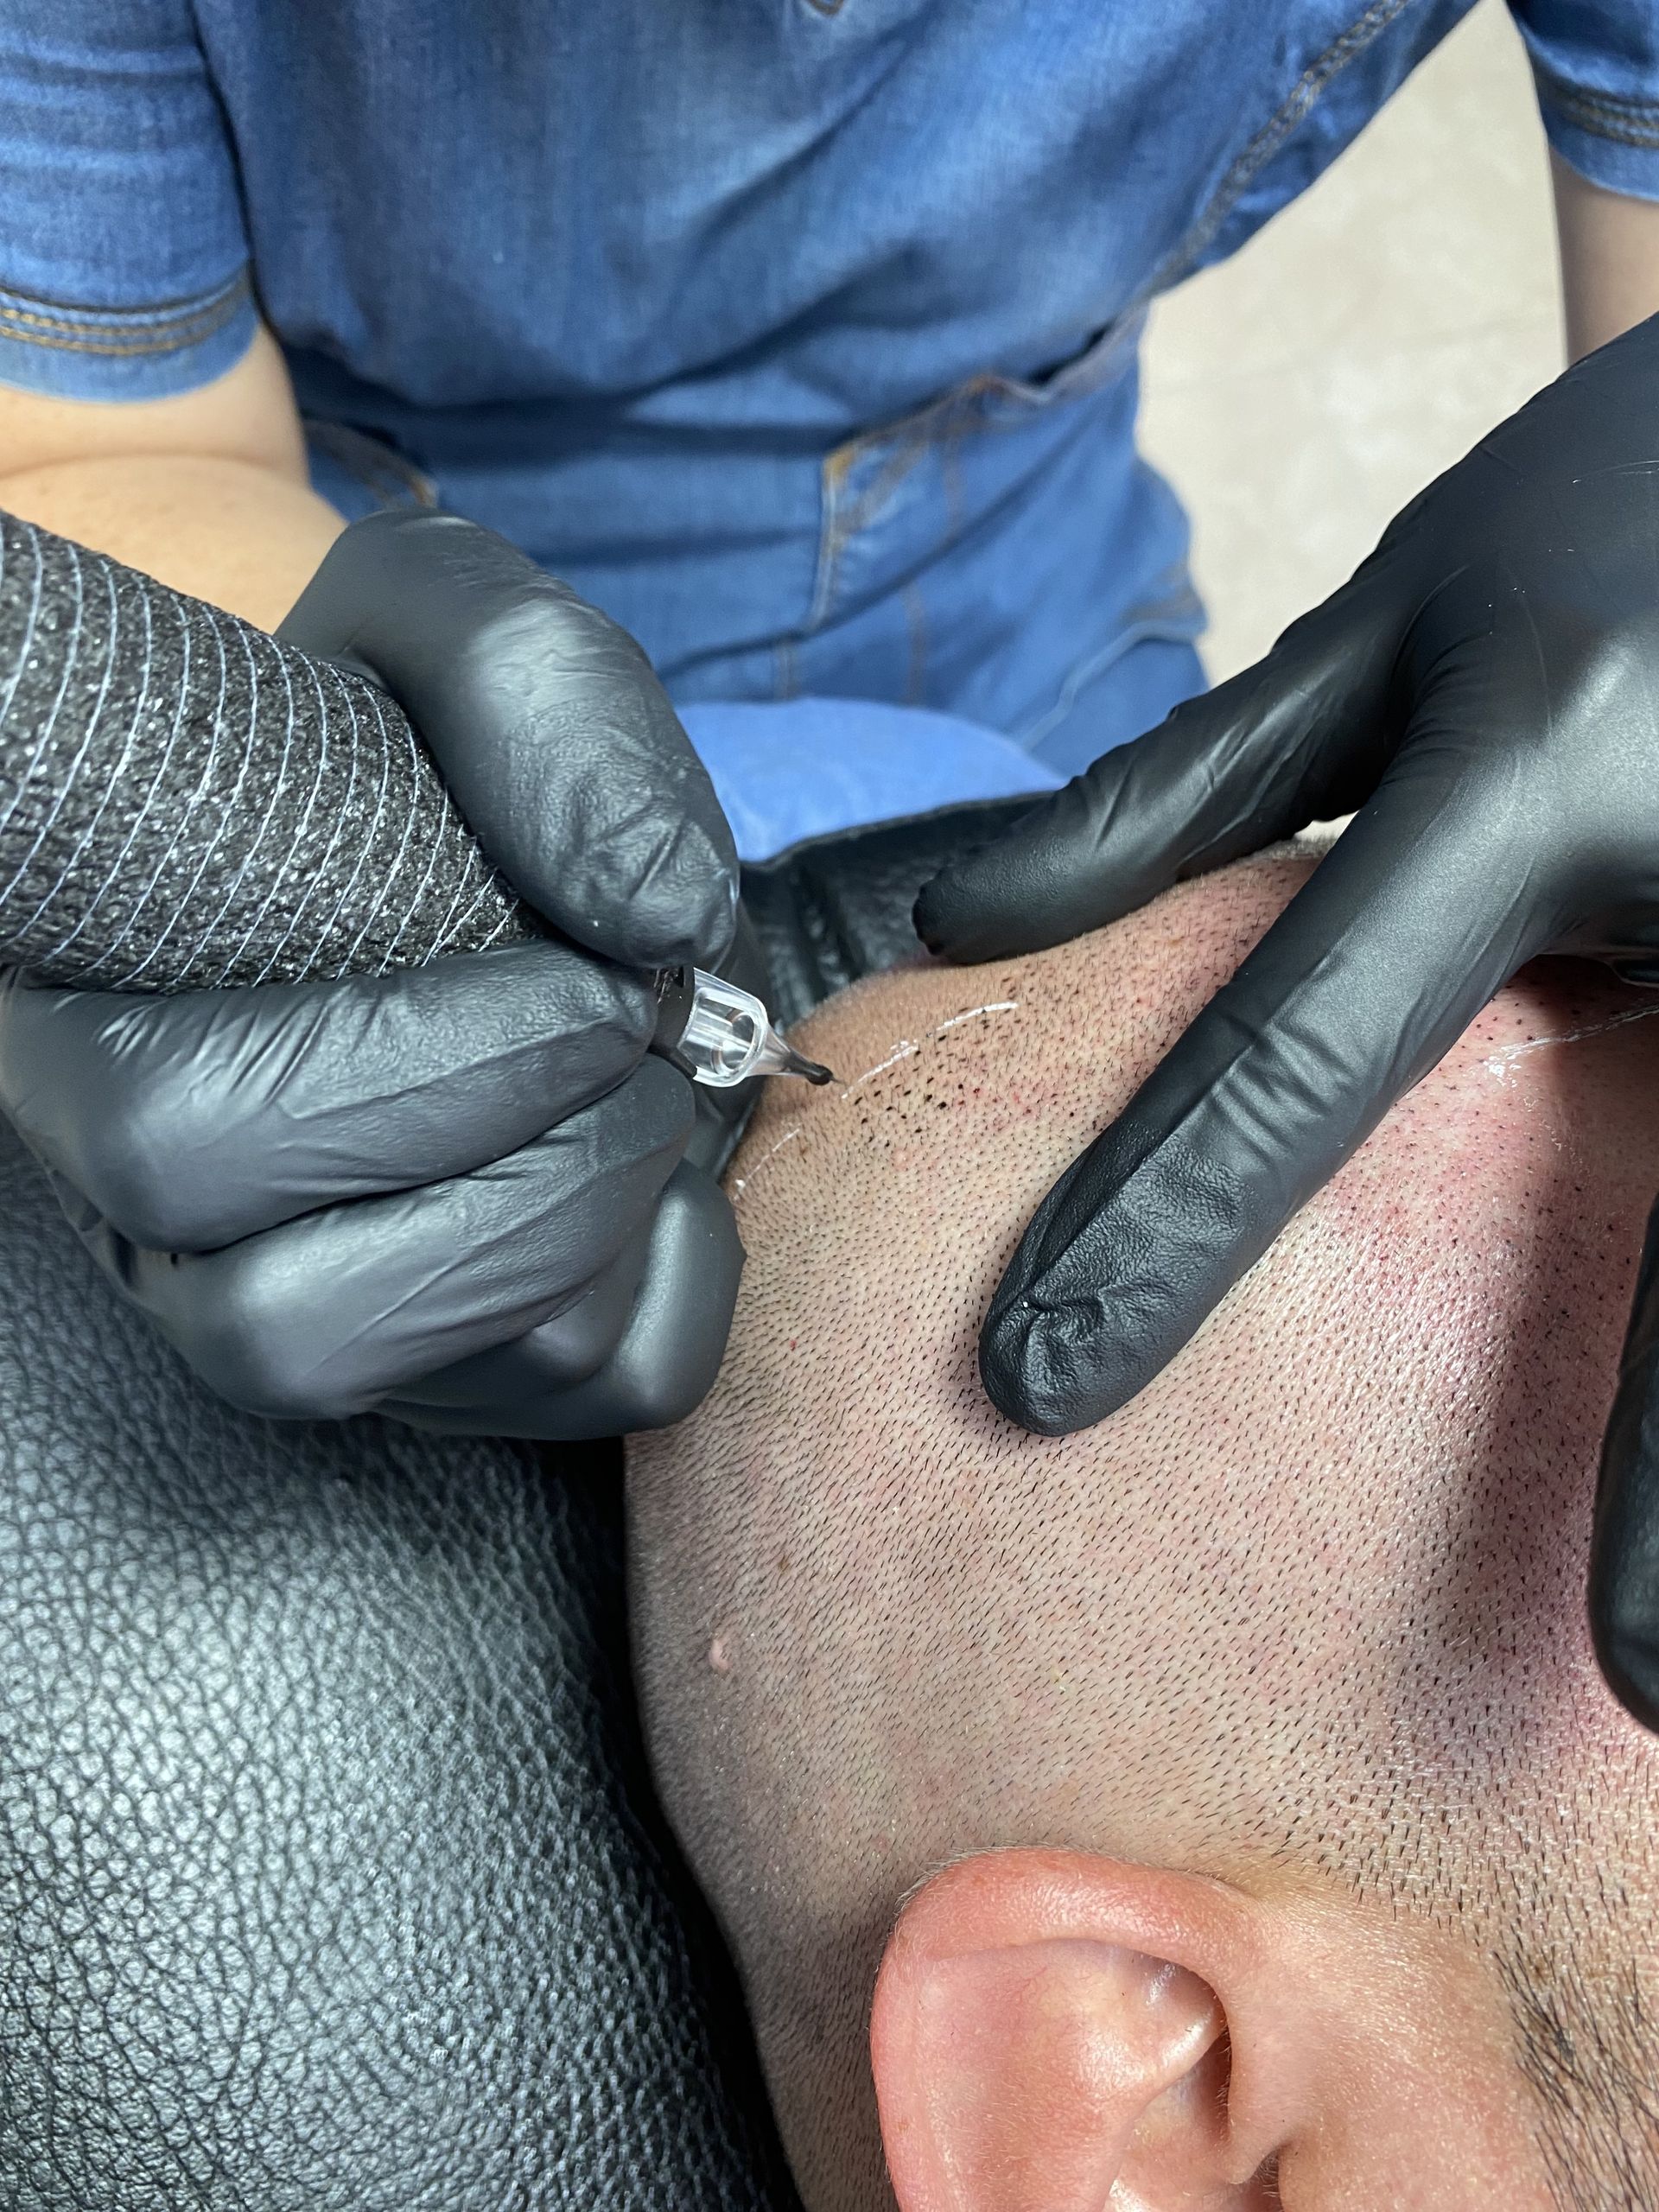 a man is getting a tattoo on his head while wearing black gloves .